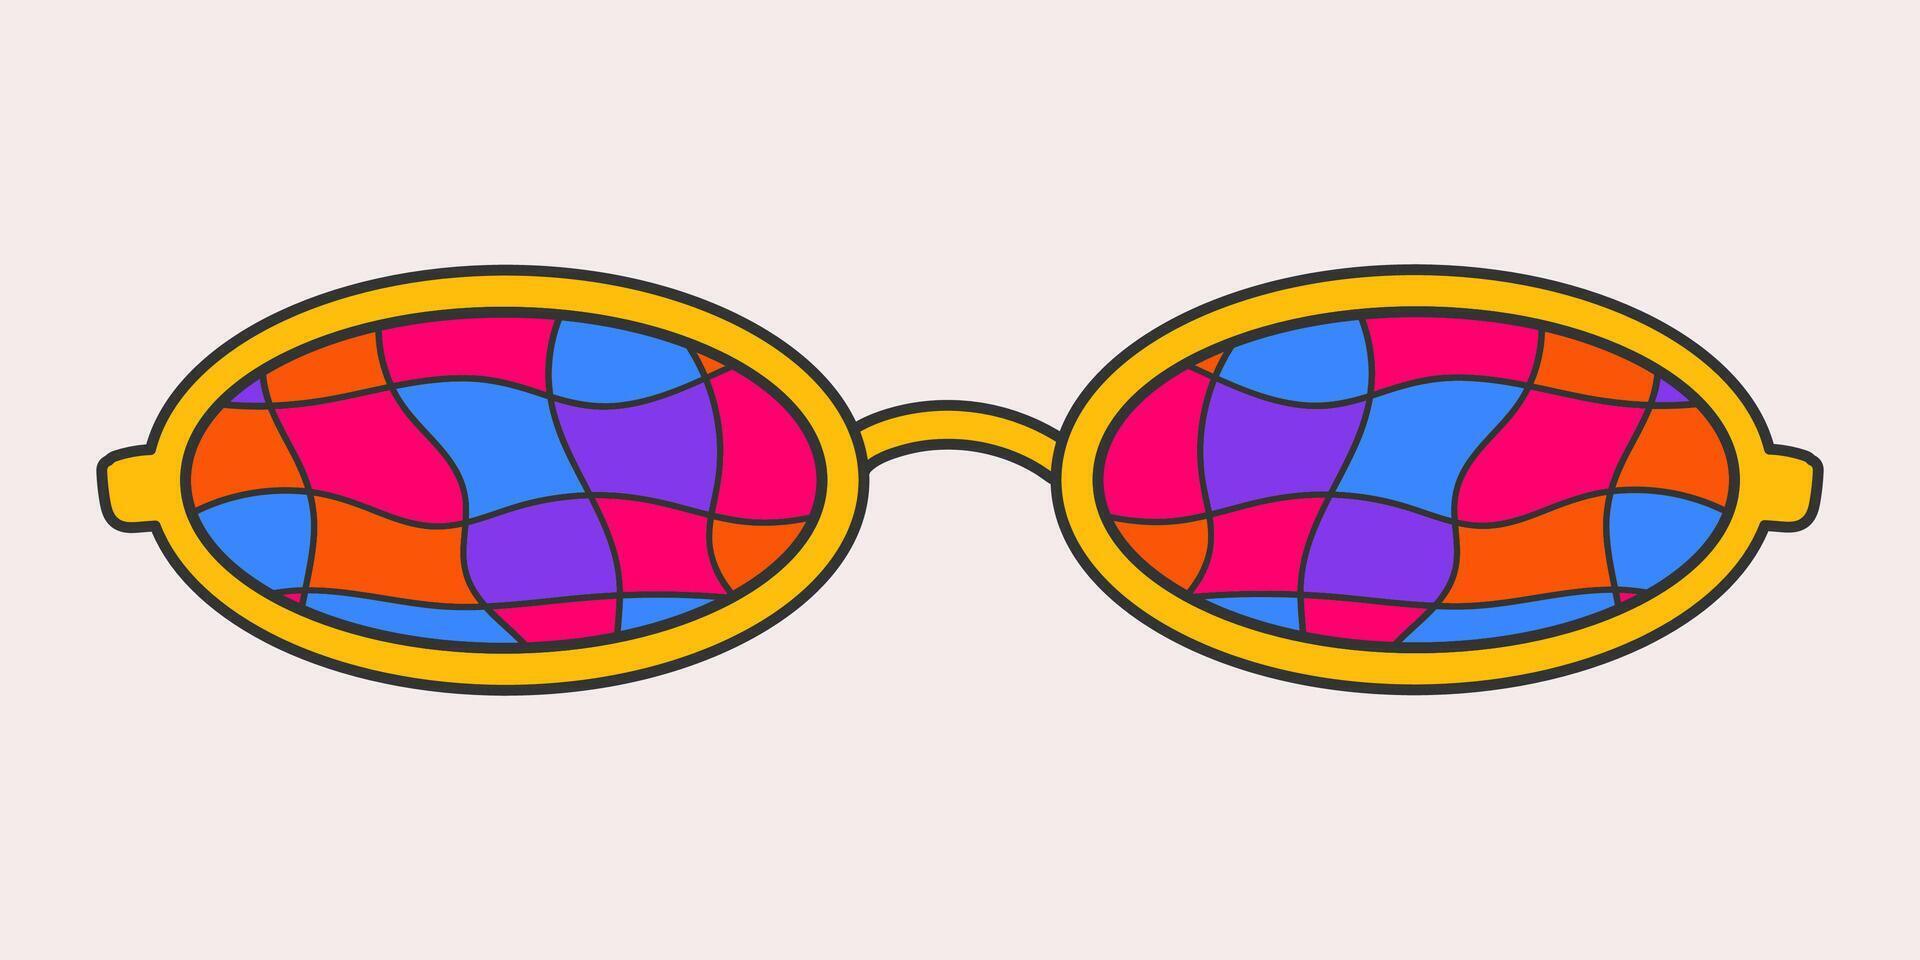 Bright oval sunglasses in a groovy style isolated on a light background. Vintage retro colors, check print on glass. Psychedelic vector doodle sticker, 70s, nostalgia, hippie.